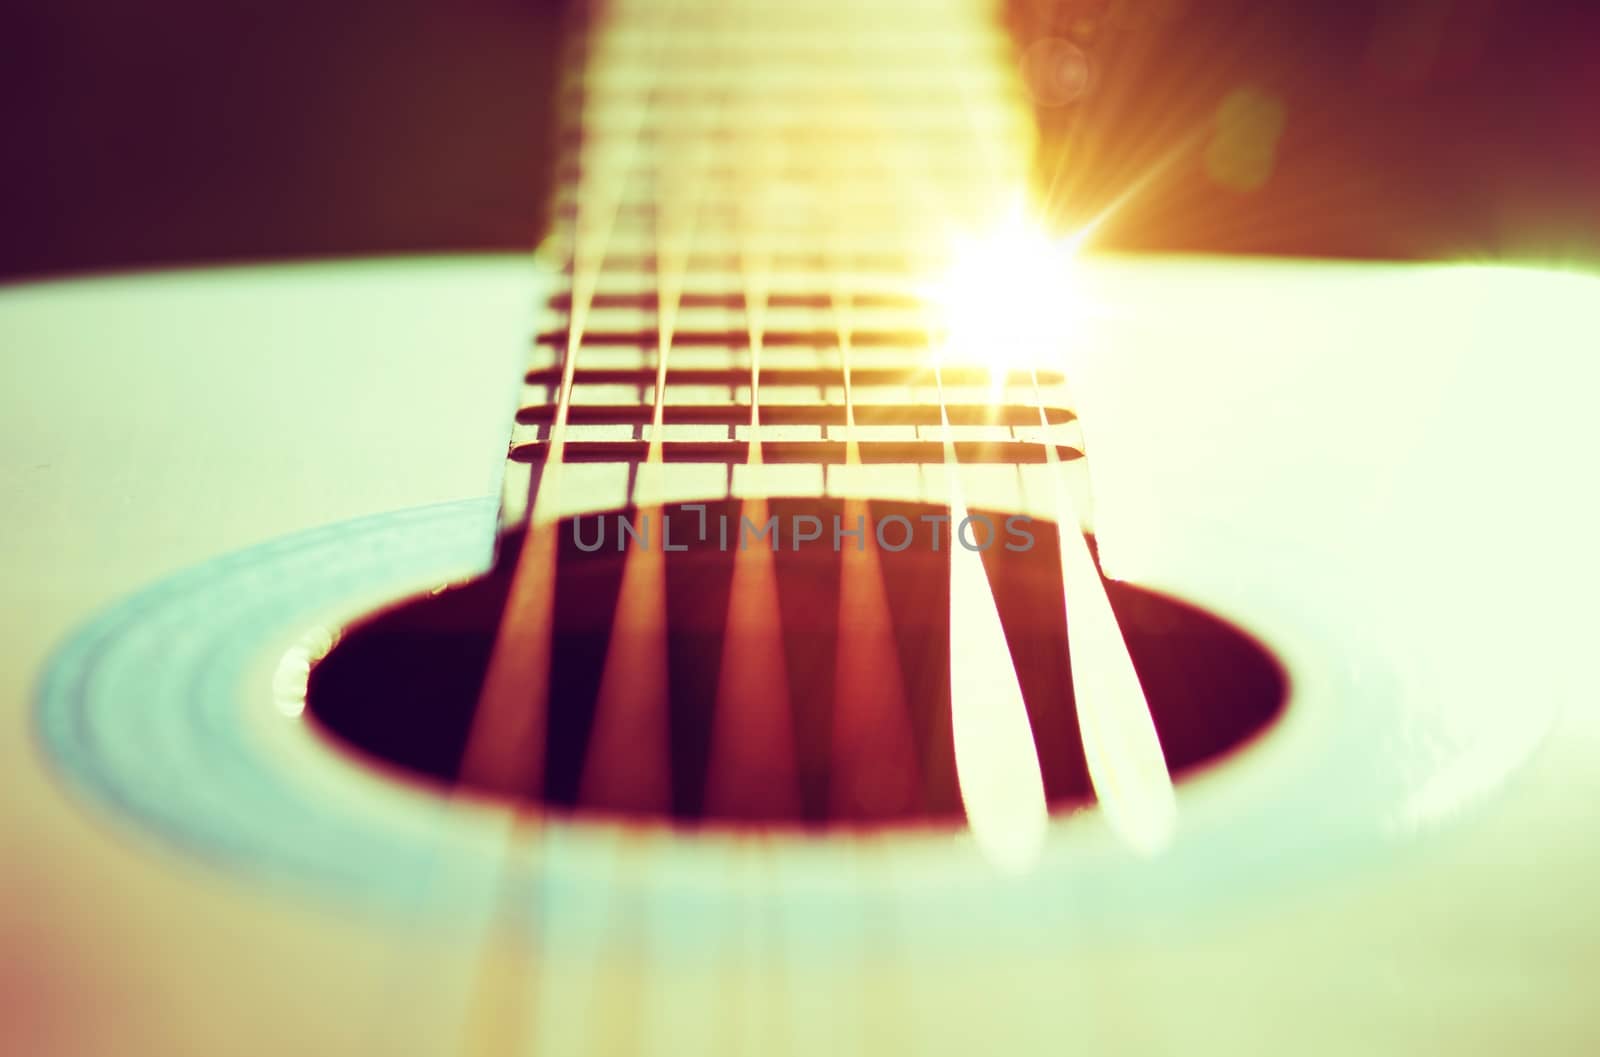 Guitar Strings Concept Photo. Guitar Playing Theme with Sun Rays Reflections.